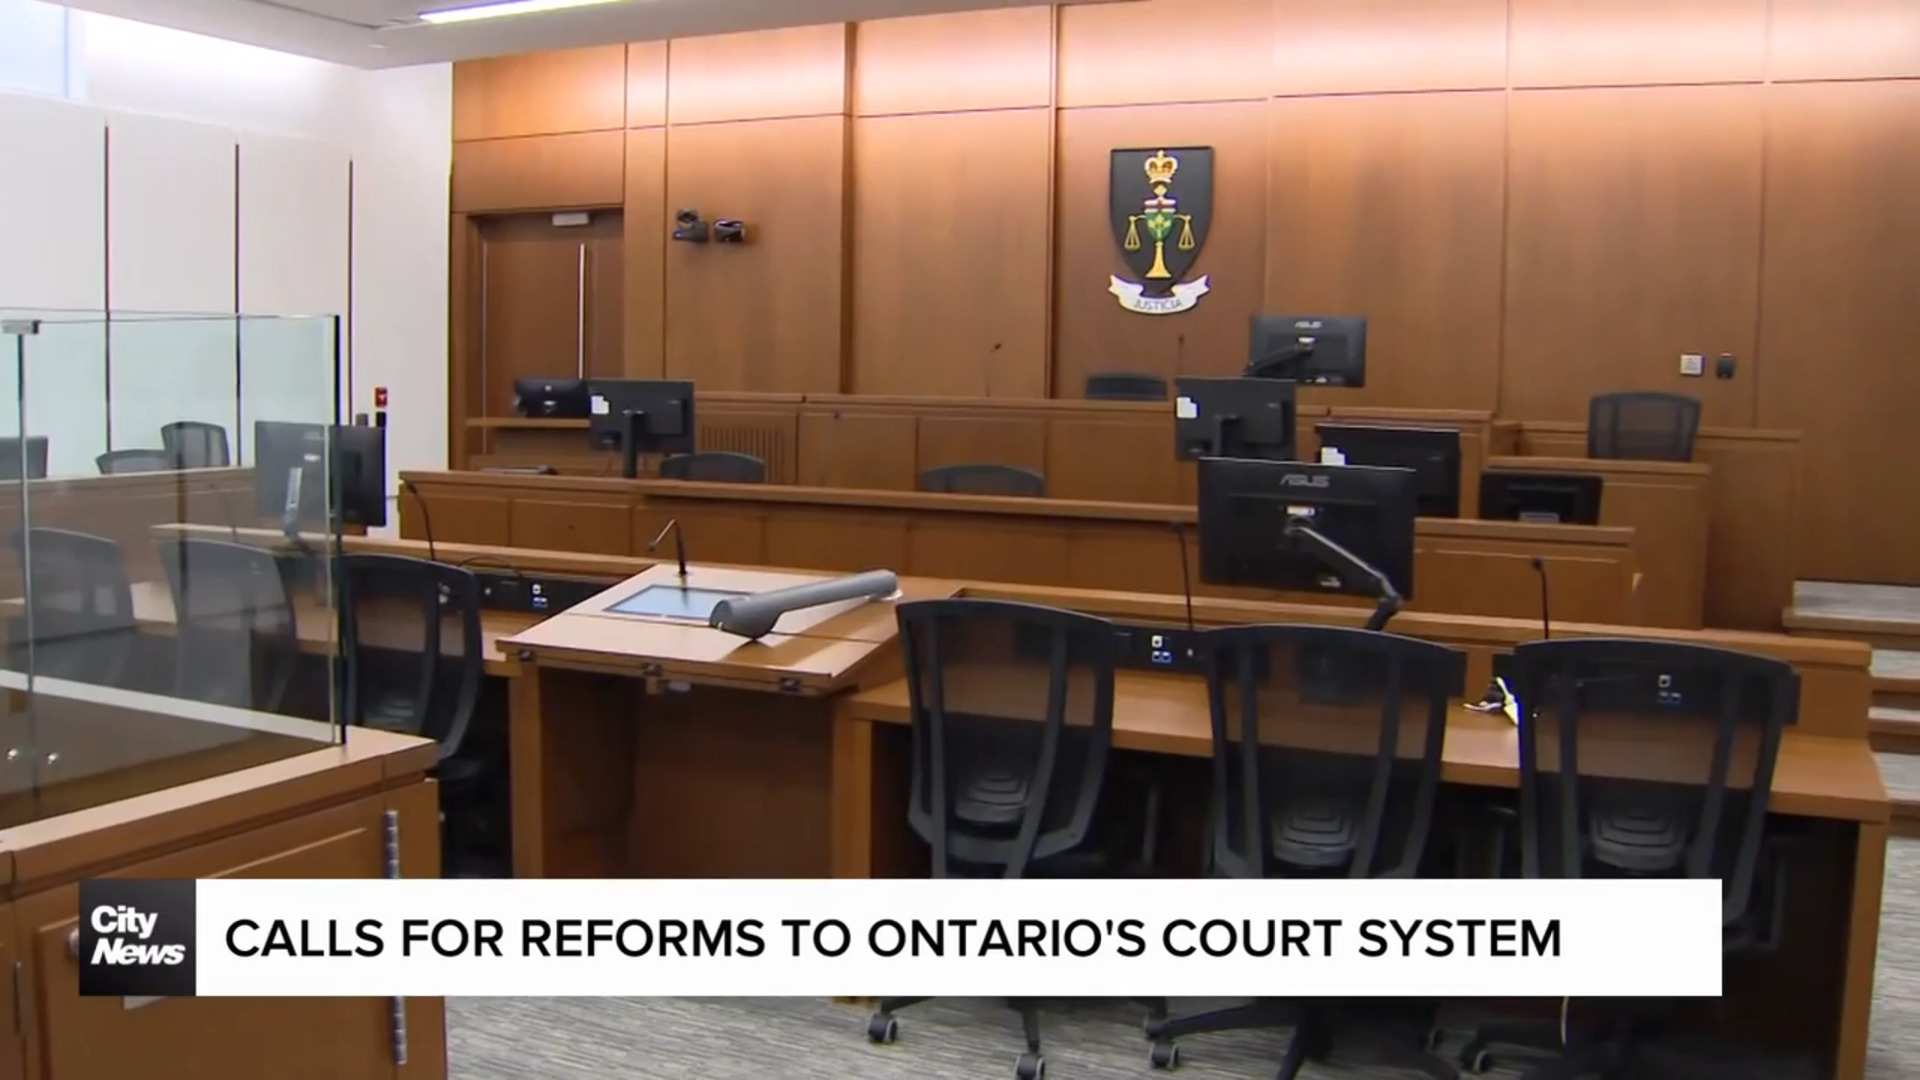 Calls for reforms to Ontario's court system